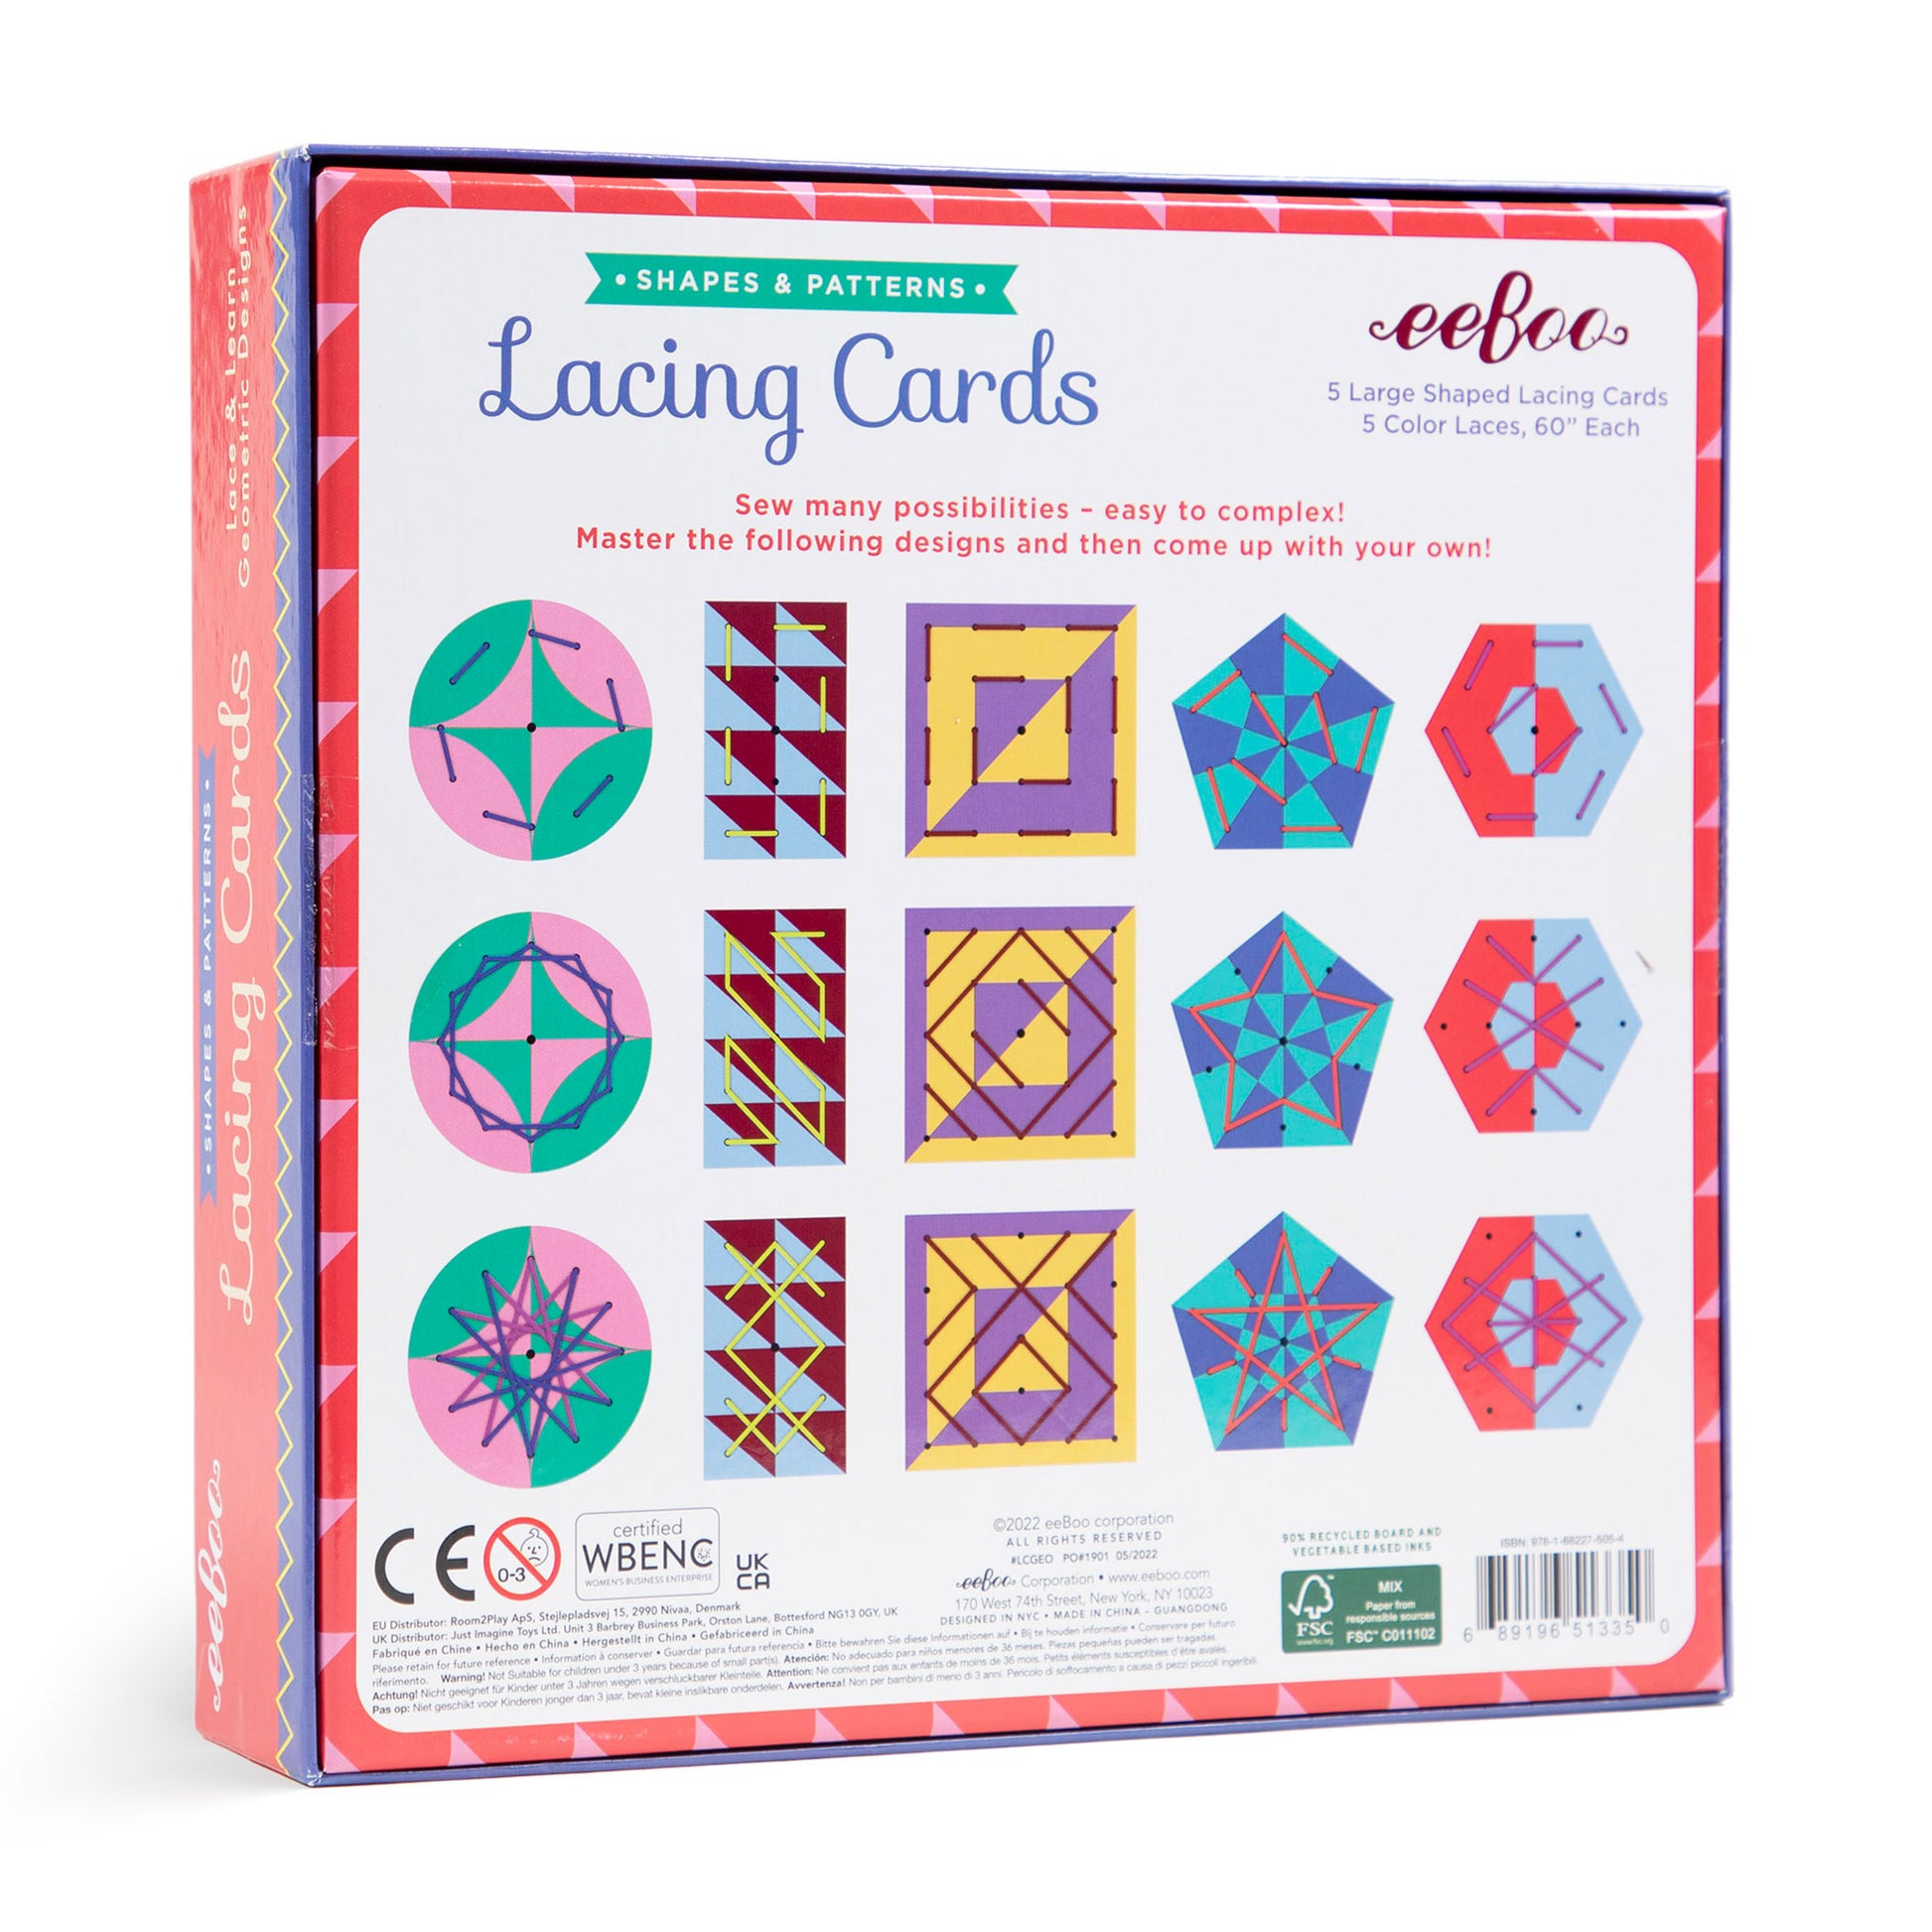 Shapes & Patterns Lacing Cards eeBoo Montessori Toys and Gifts for First Grade Kids 5+ | Builds hand eye coordination skills